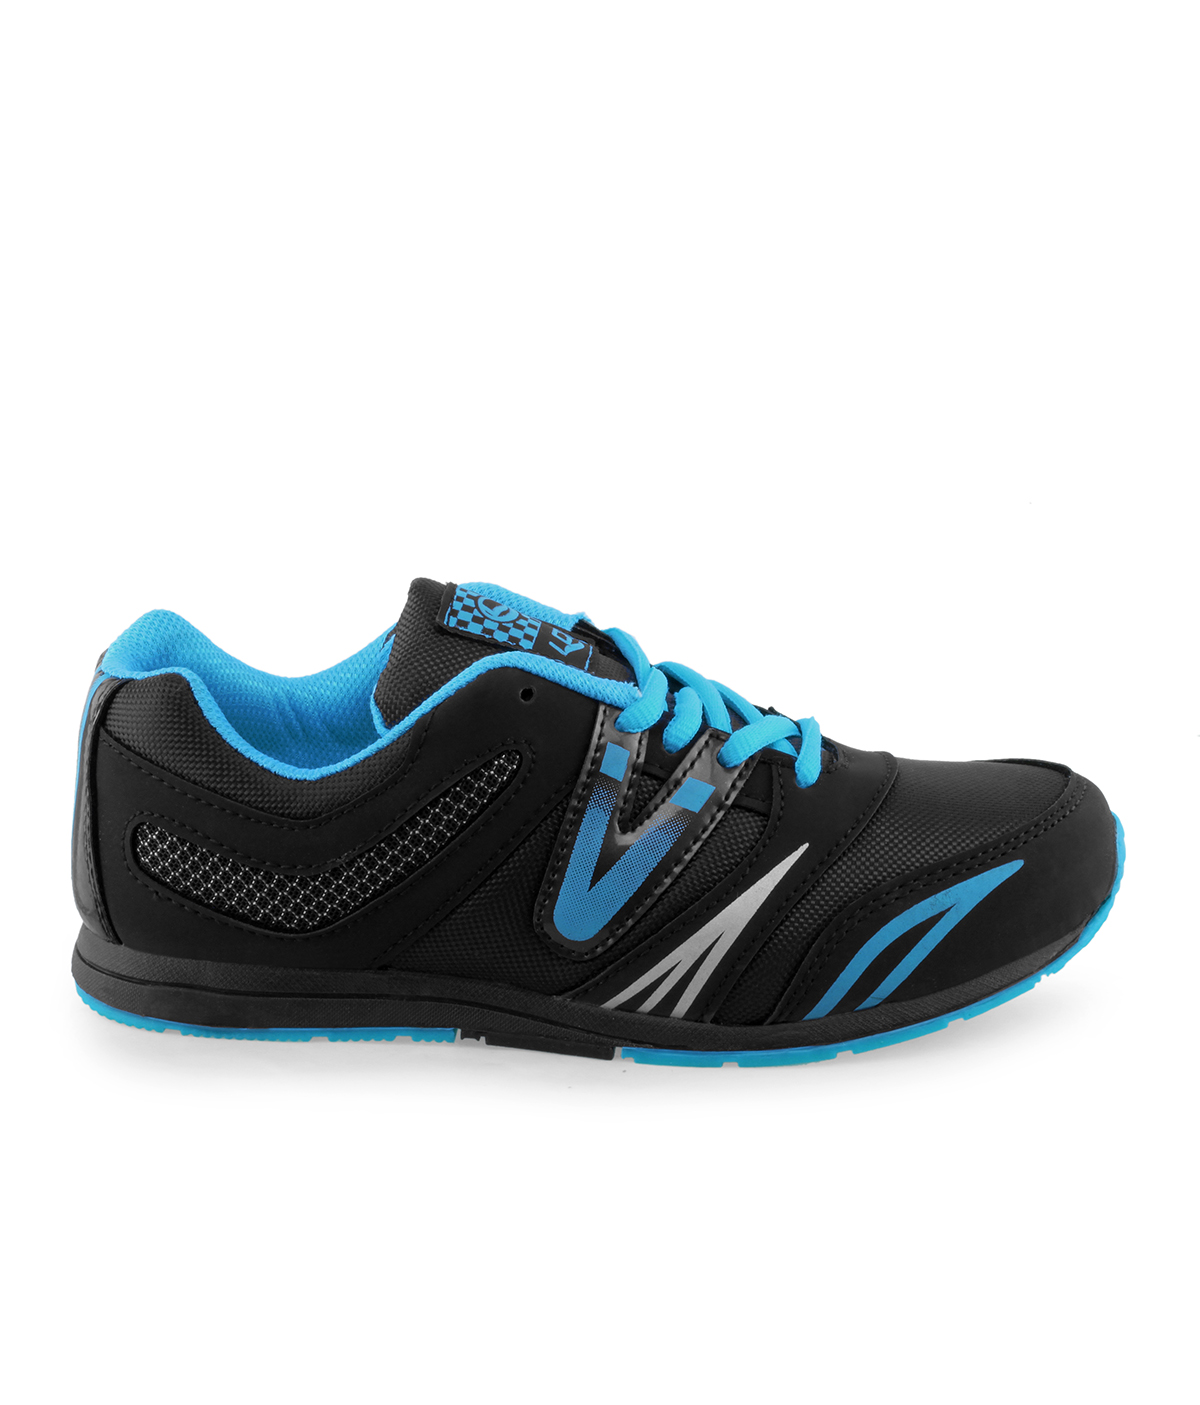 Buy Lancer Women's Blue & Black Sports Shoes Online @ ₹799 from ShopClues